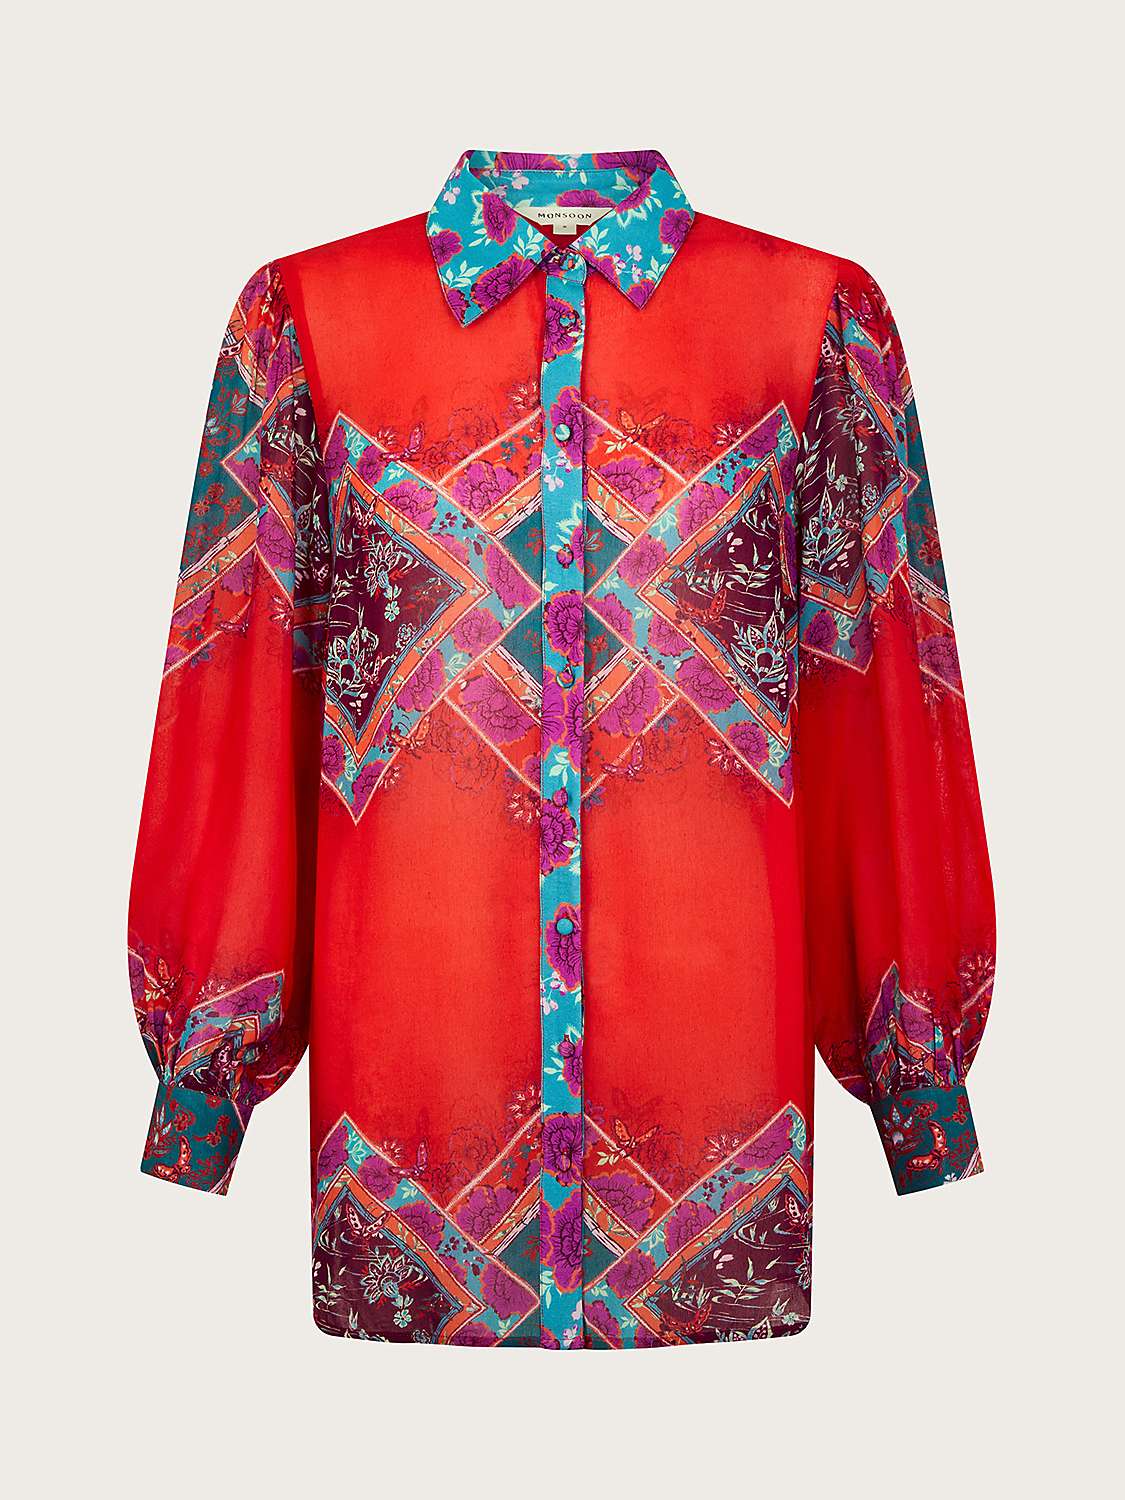 Buy Monsoon Tiffany Blouse, Red/Multi Online at johnlewis.com